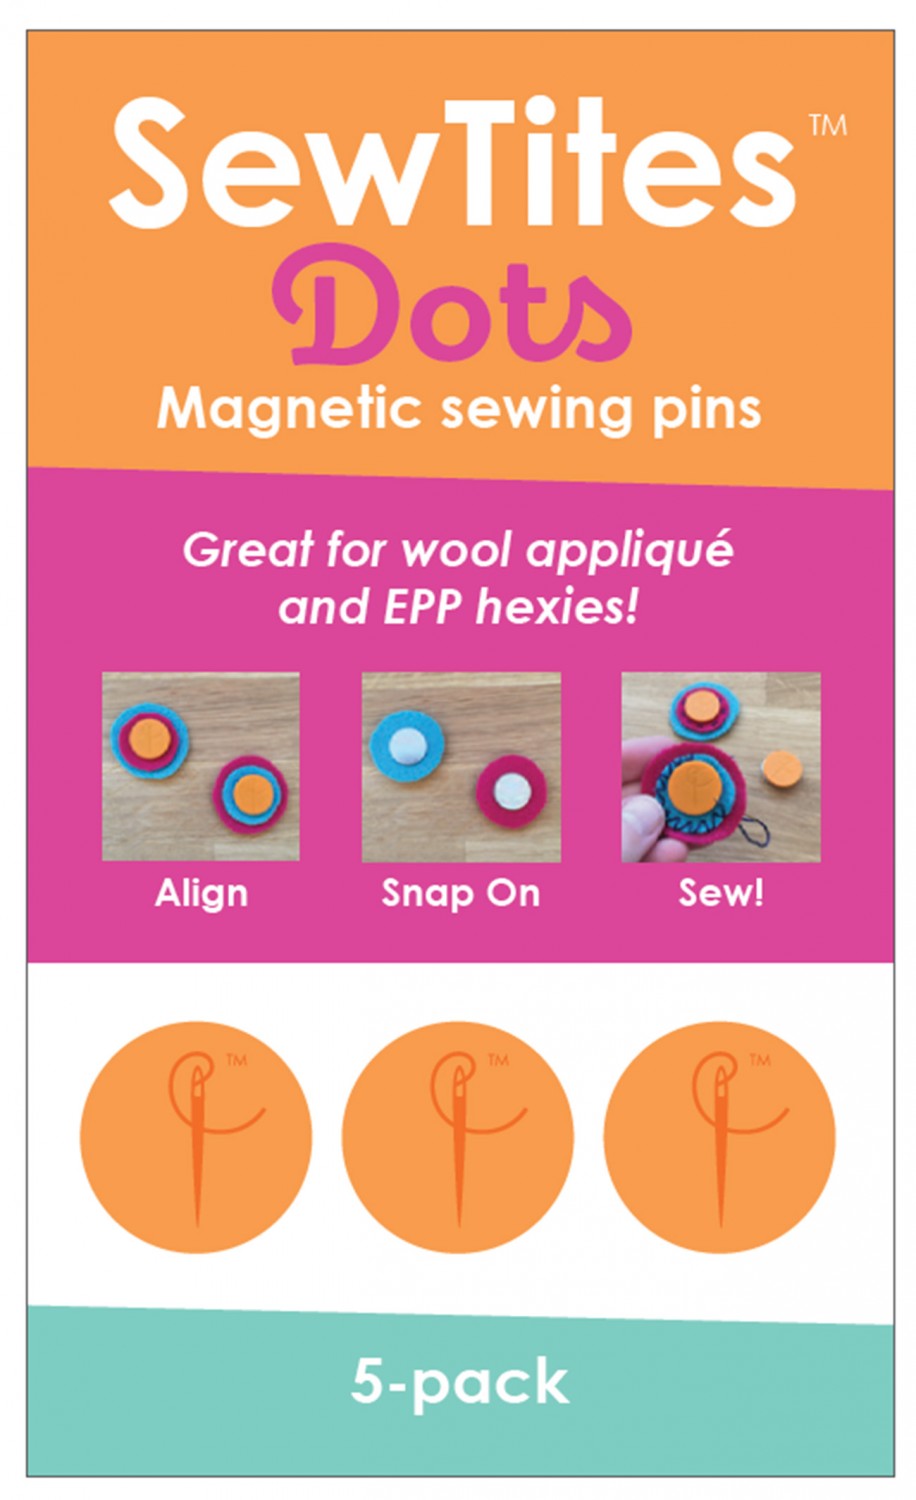 SewTites Dots - Magnetic sewing pins